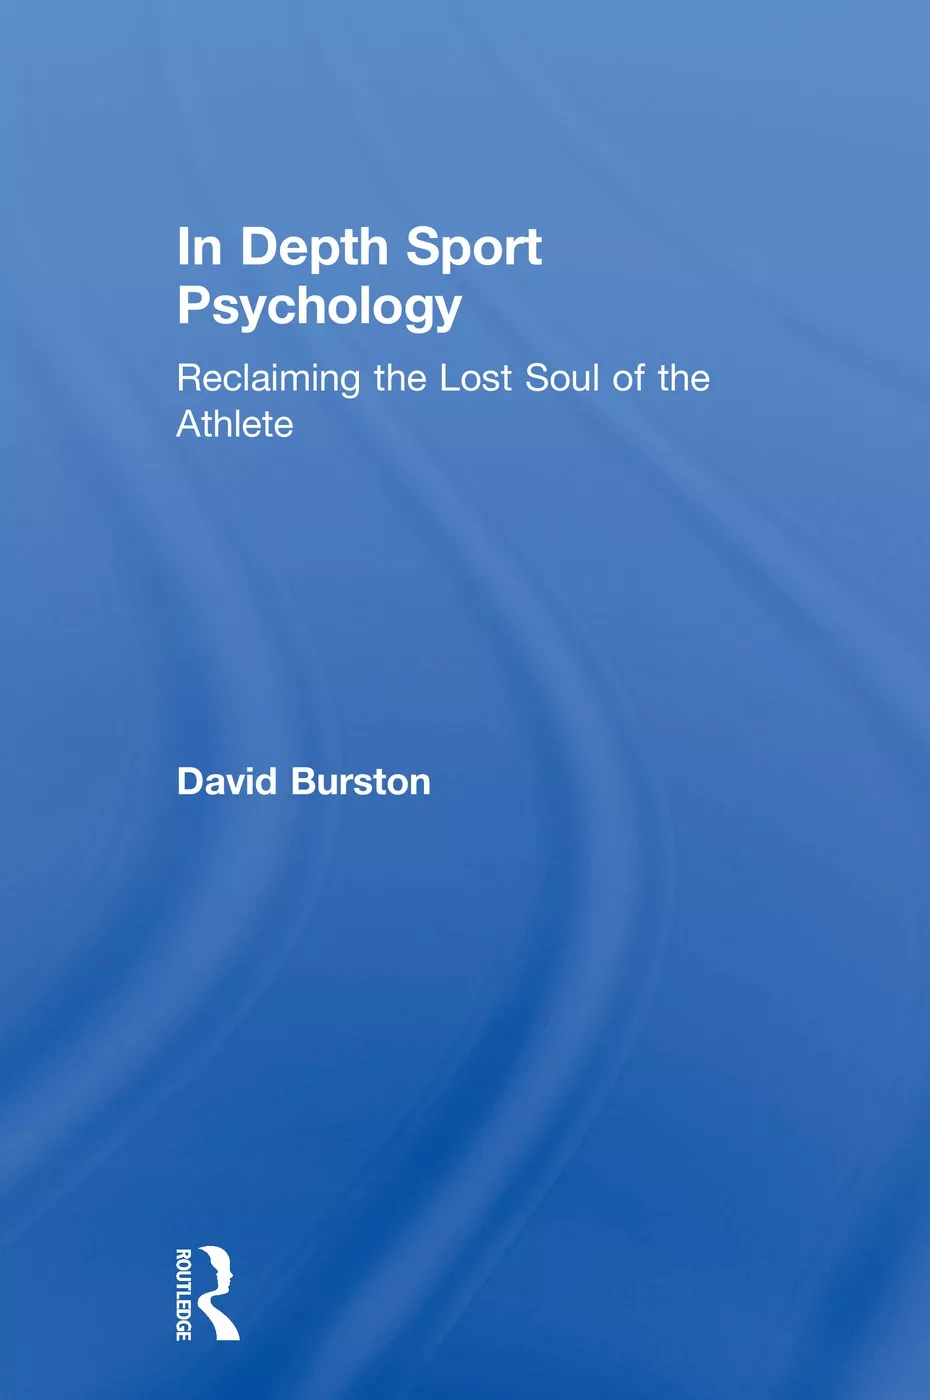 In Depth Sport Psychology: Reclaiming the Lost Soul of the Athlete